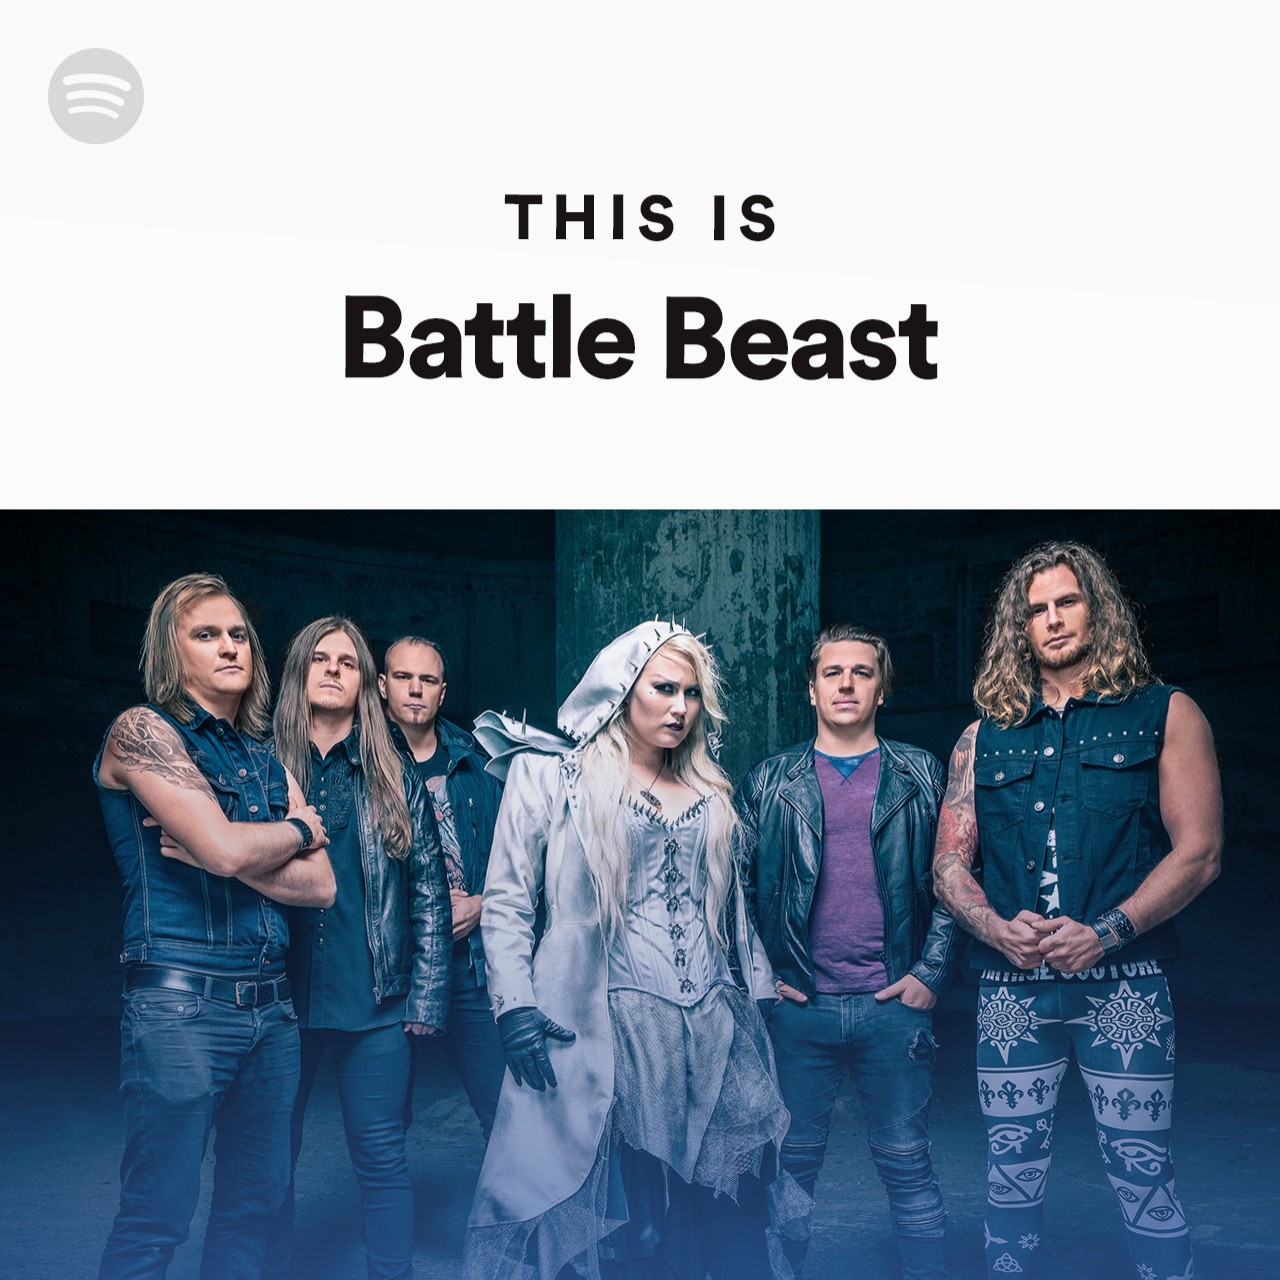 This Is Battle Beast